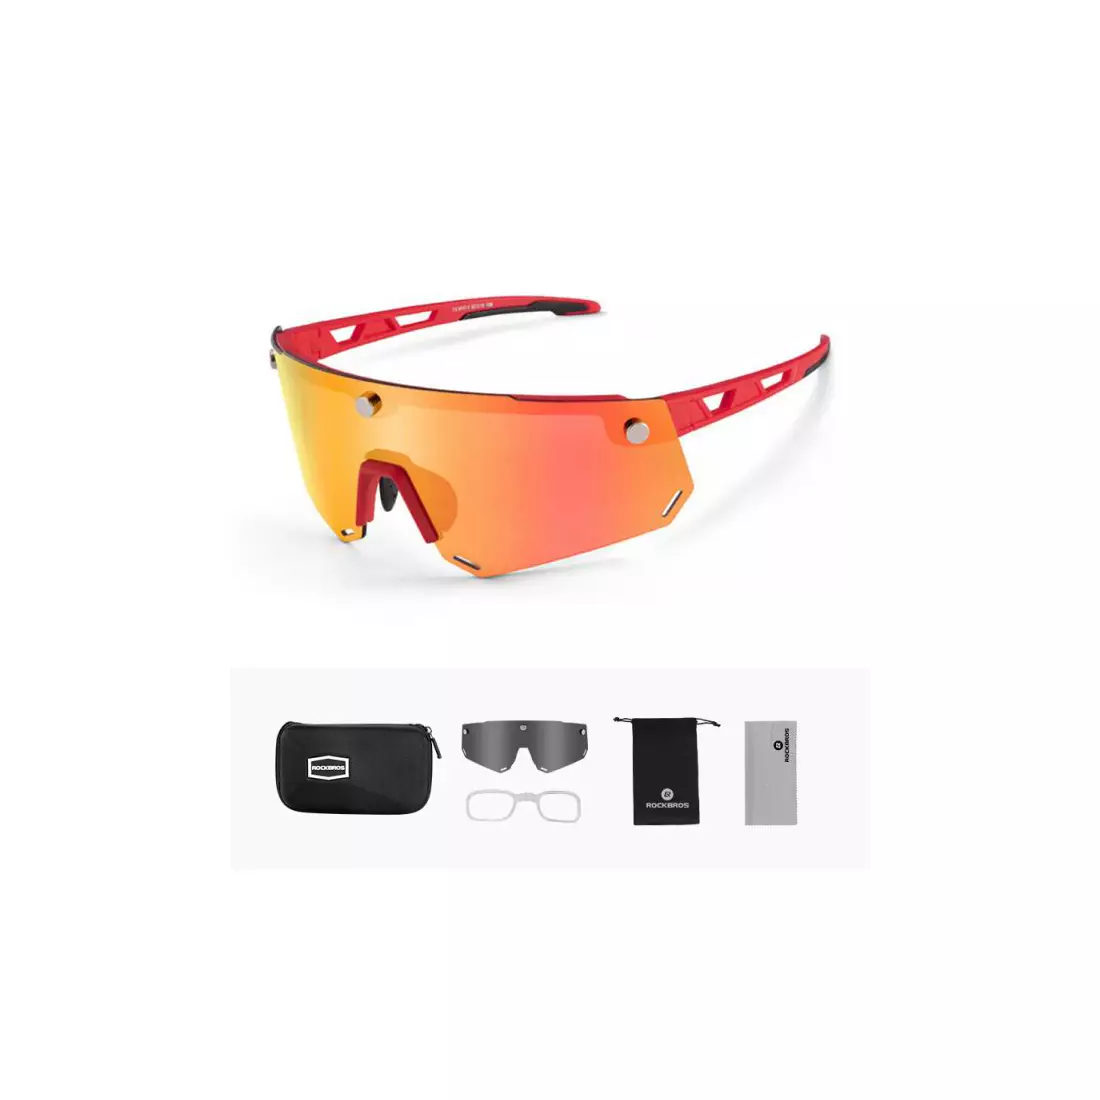 Rockbros SP213RB bicycle / sports glasses with polarized lens red 